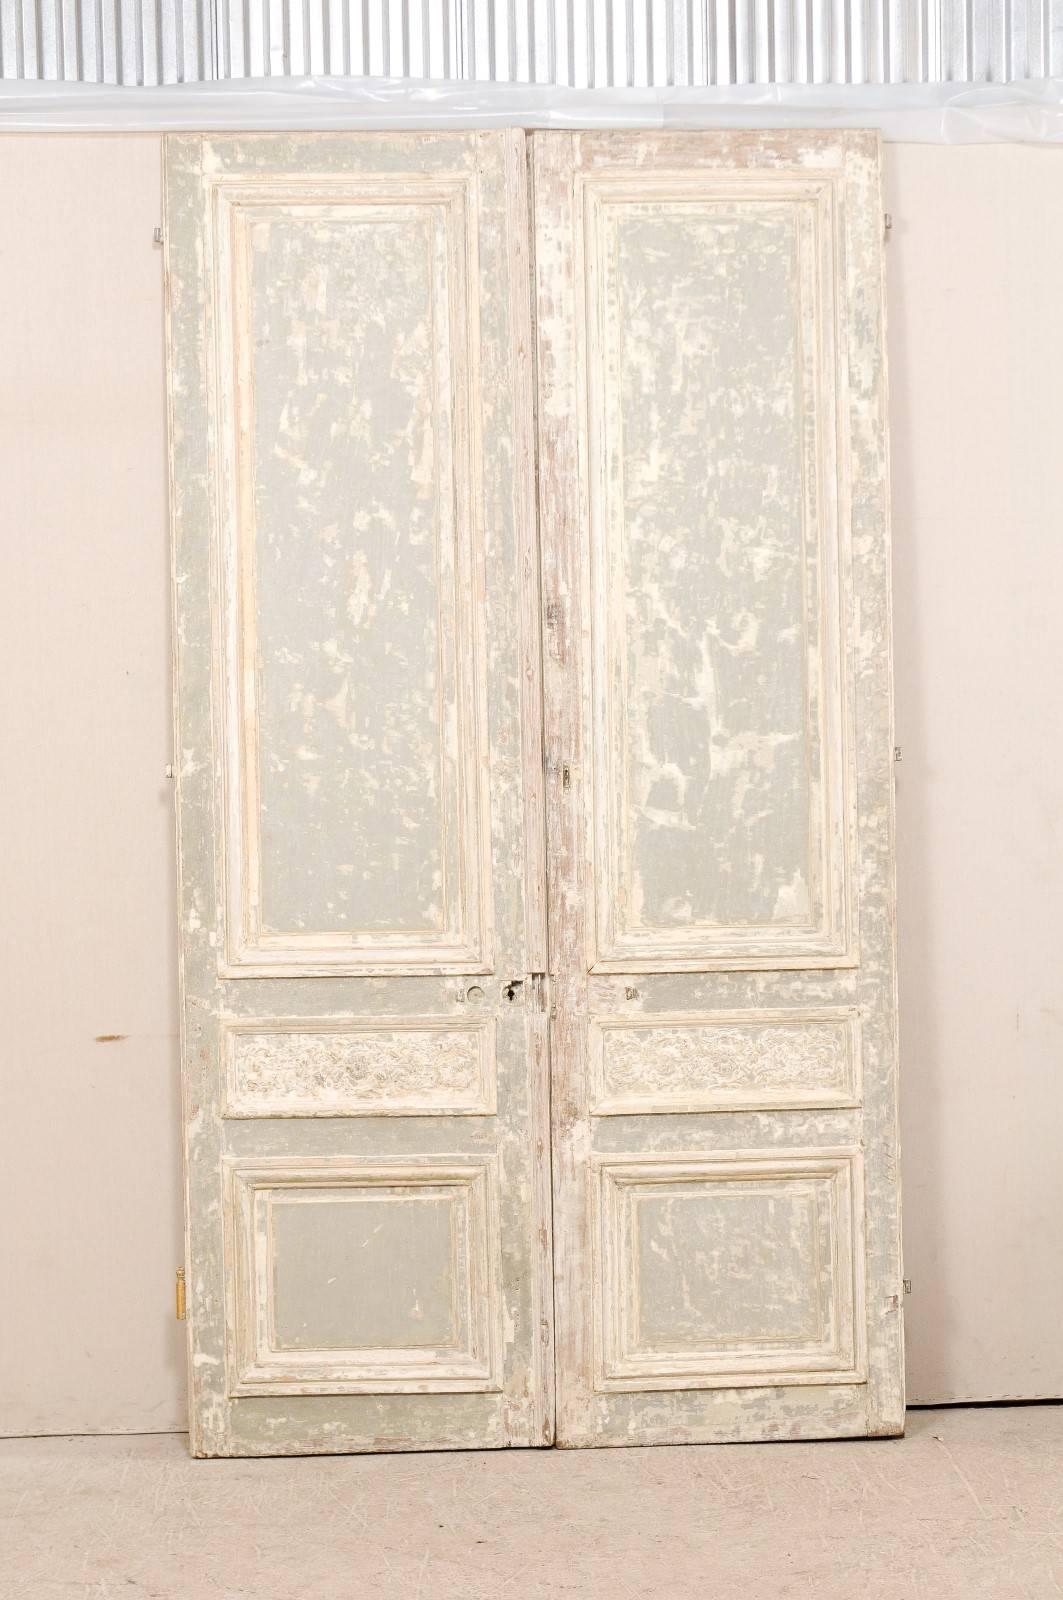 A tall pair of 19th century French doors. This exquisite pair of French doors each have three recessed panels on both sides, with the top panel being more elongated. The smaller middle panels of the front sides of these doors have an abundantly